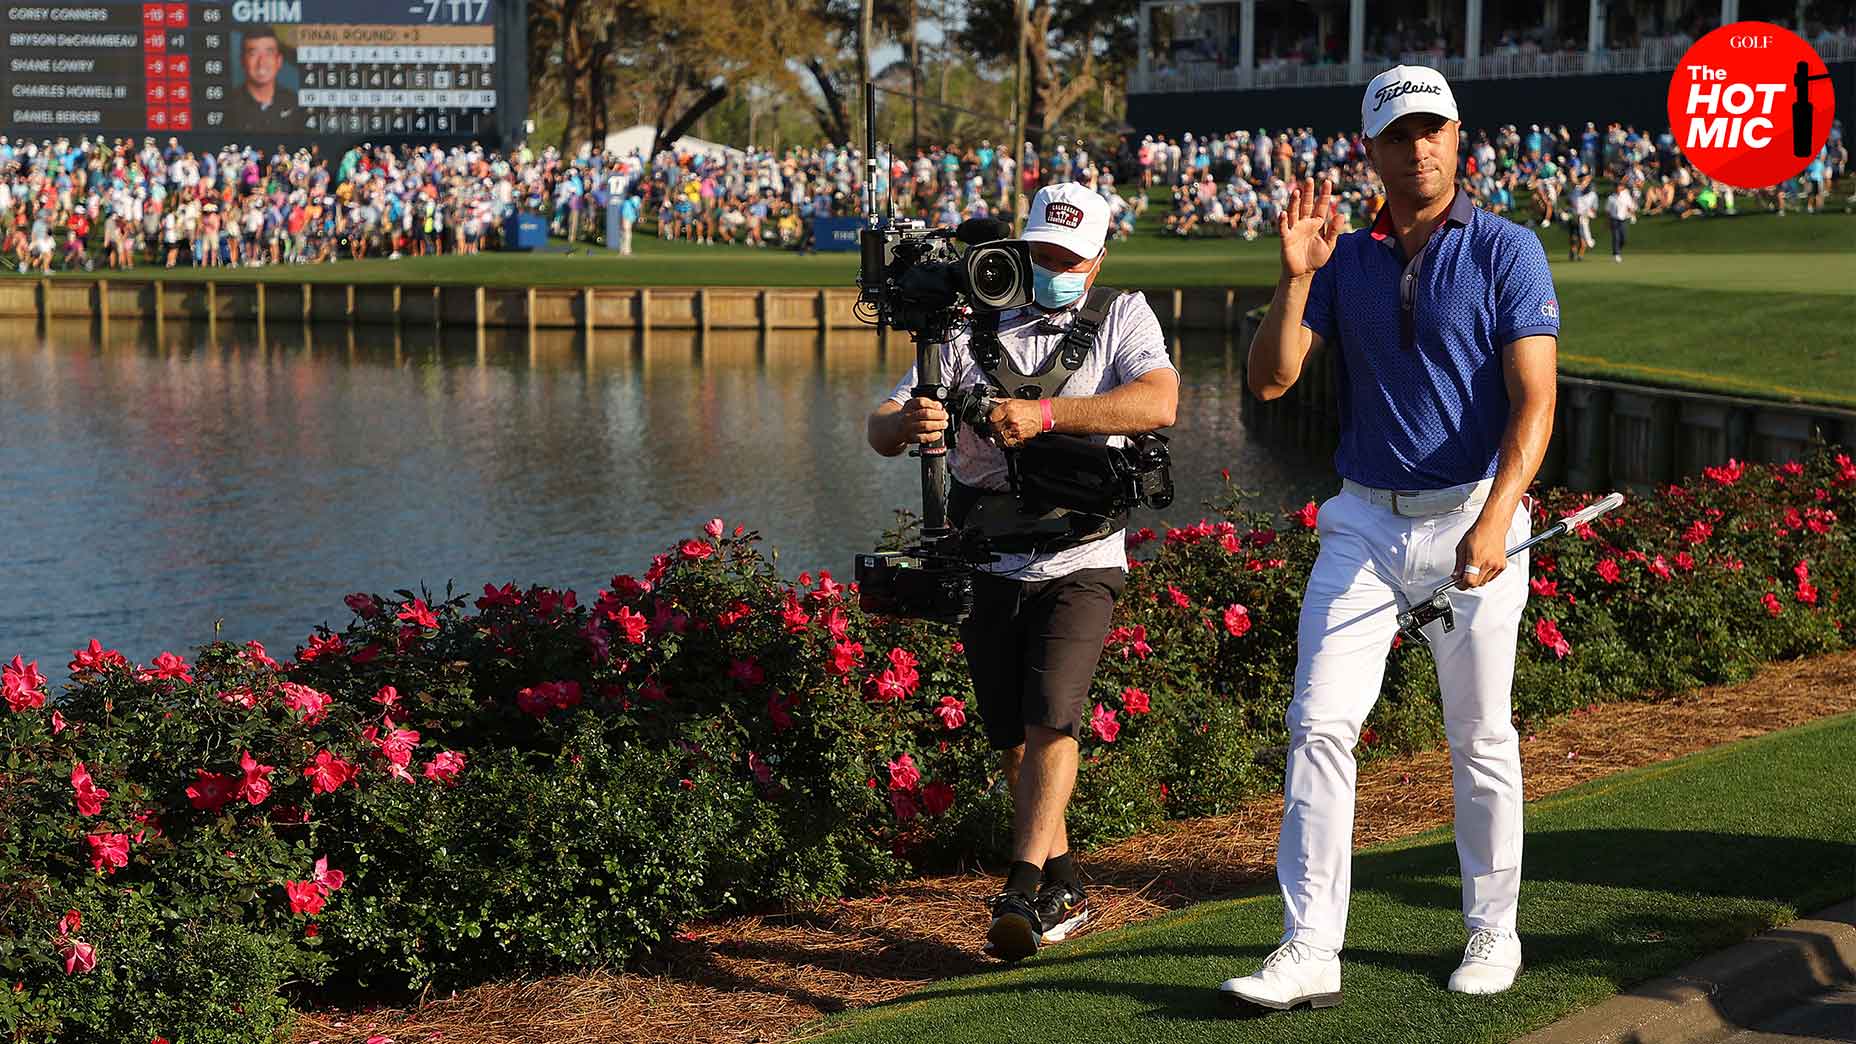 With Every Shot Live, the PGA Tour sees the future of golf entertainment